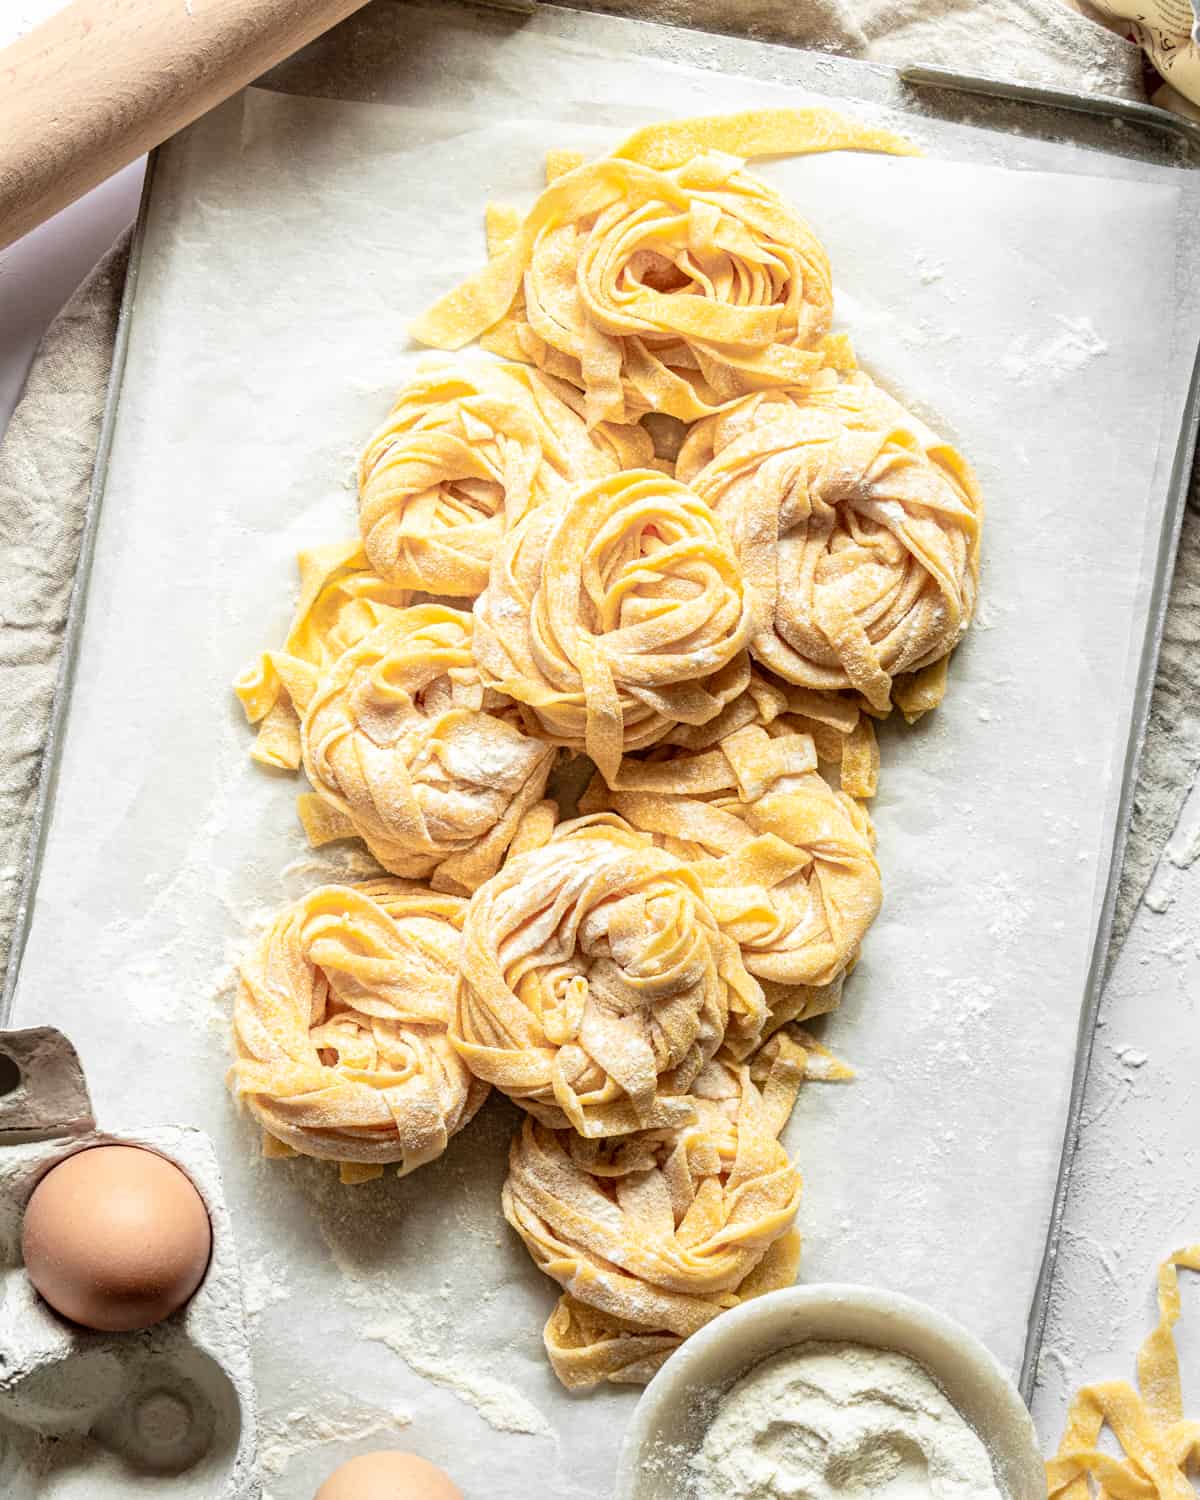 Nest of homemade pasta on a tray with eggs and a rolling pin